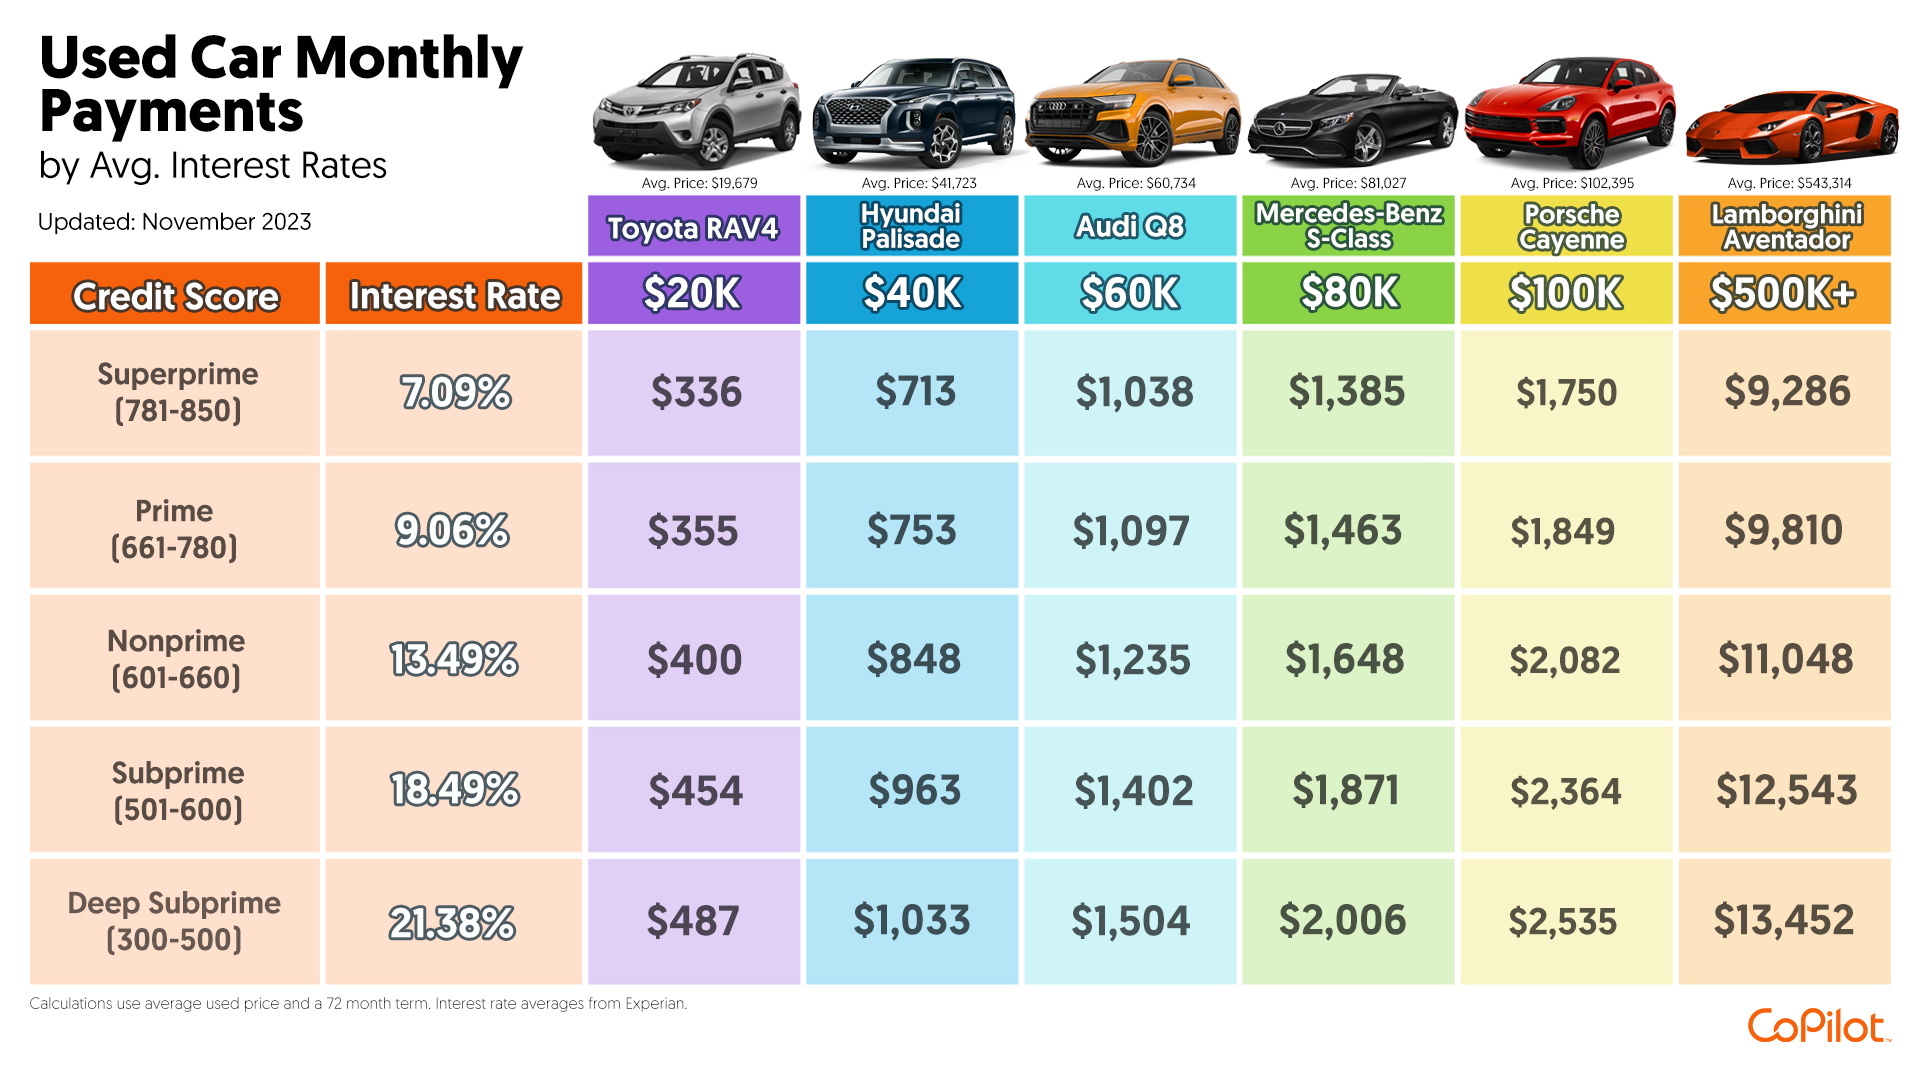 Monthly payment amounts for used cars at various price levels and interest rates